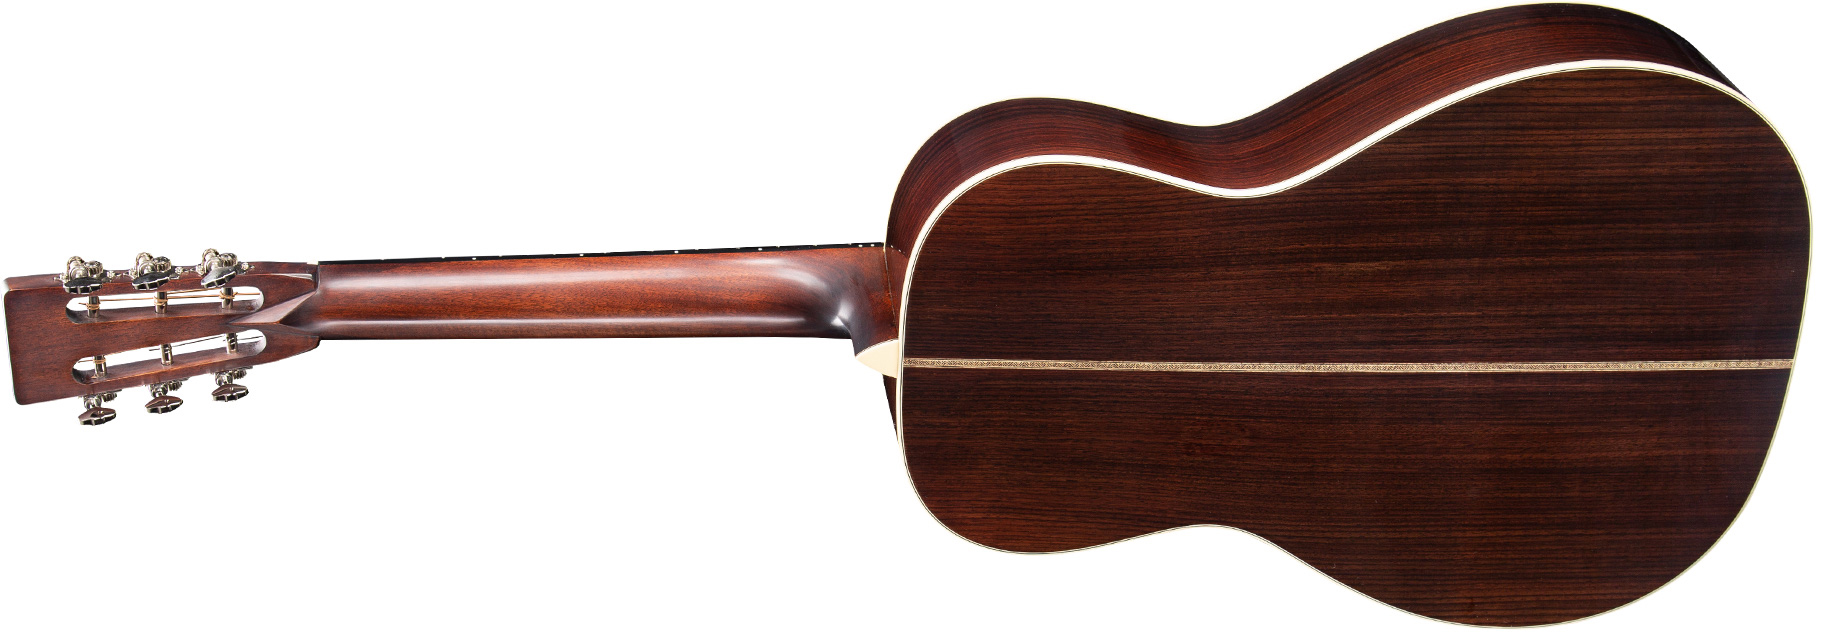 Eastman E20p Traditional Parlor Epicea Palissandre Eb - Natural - Westerngitaar & electro - Variation 1